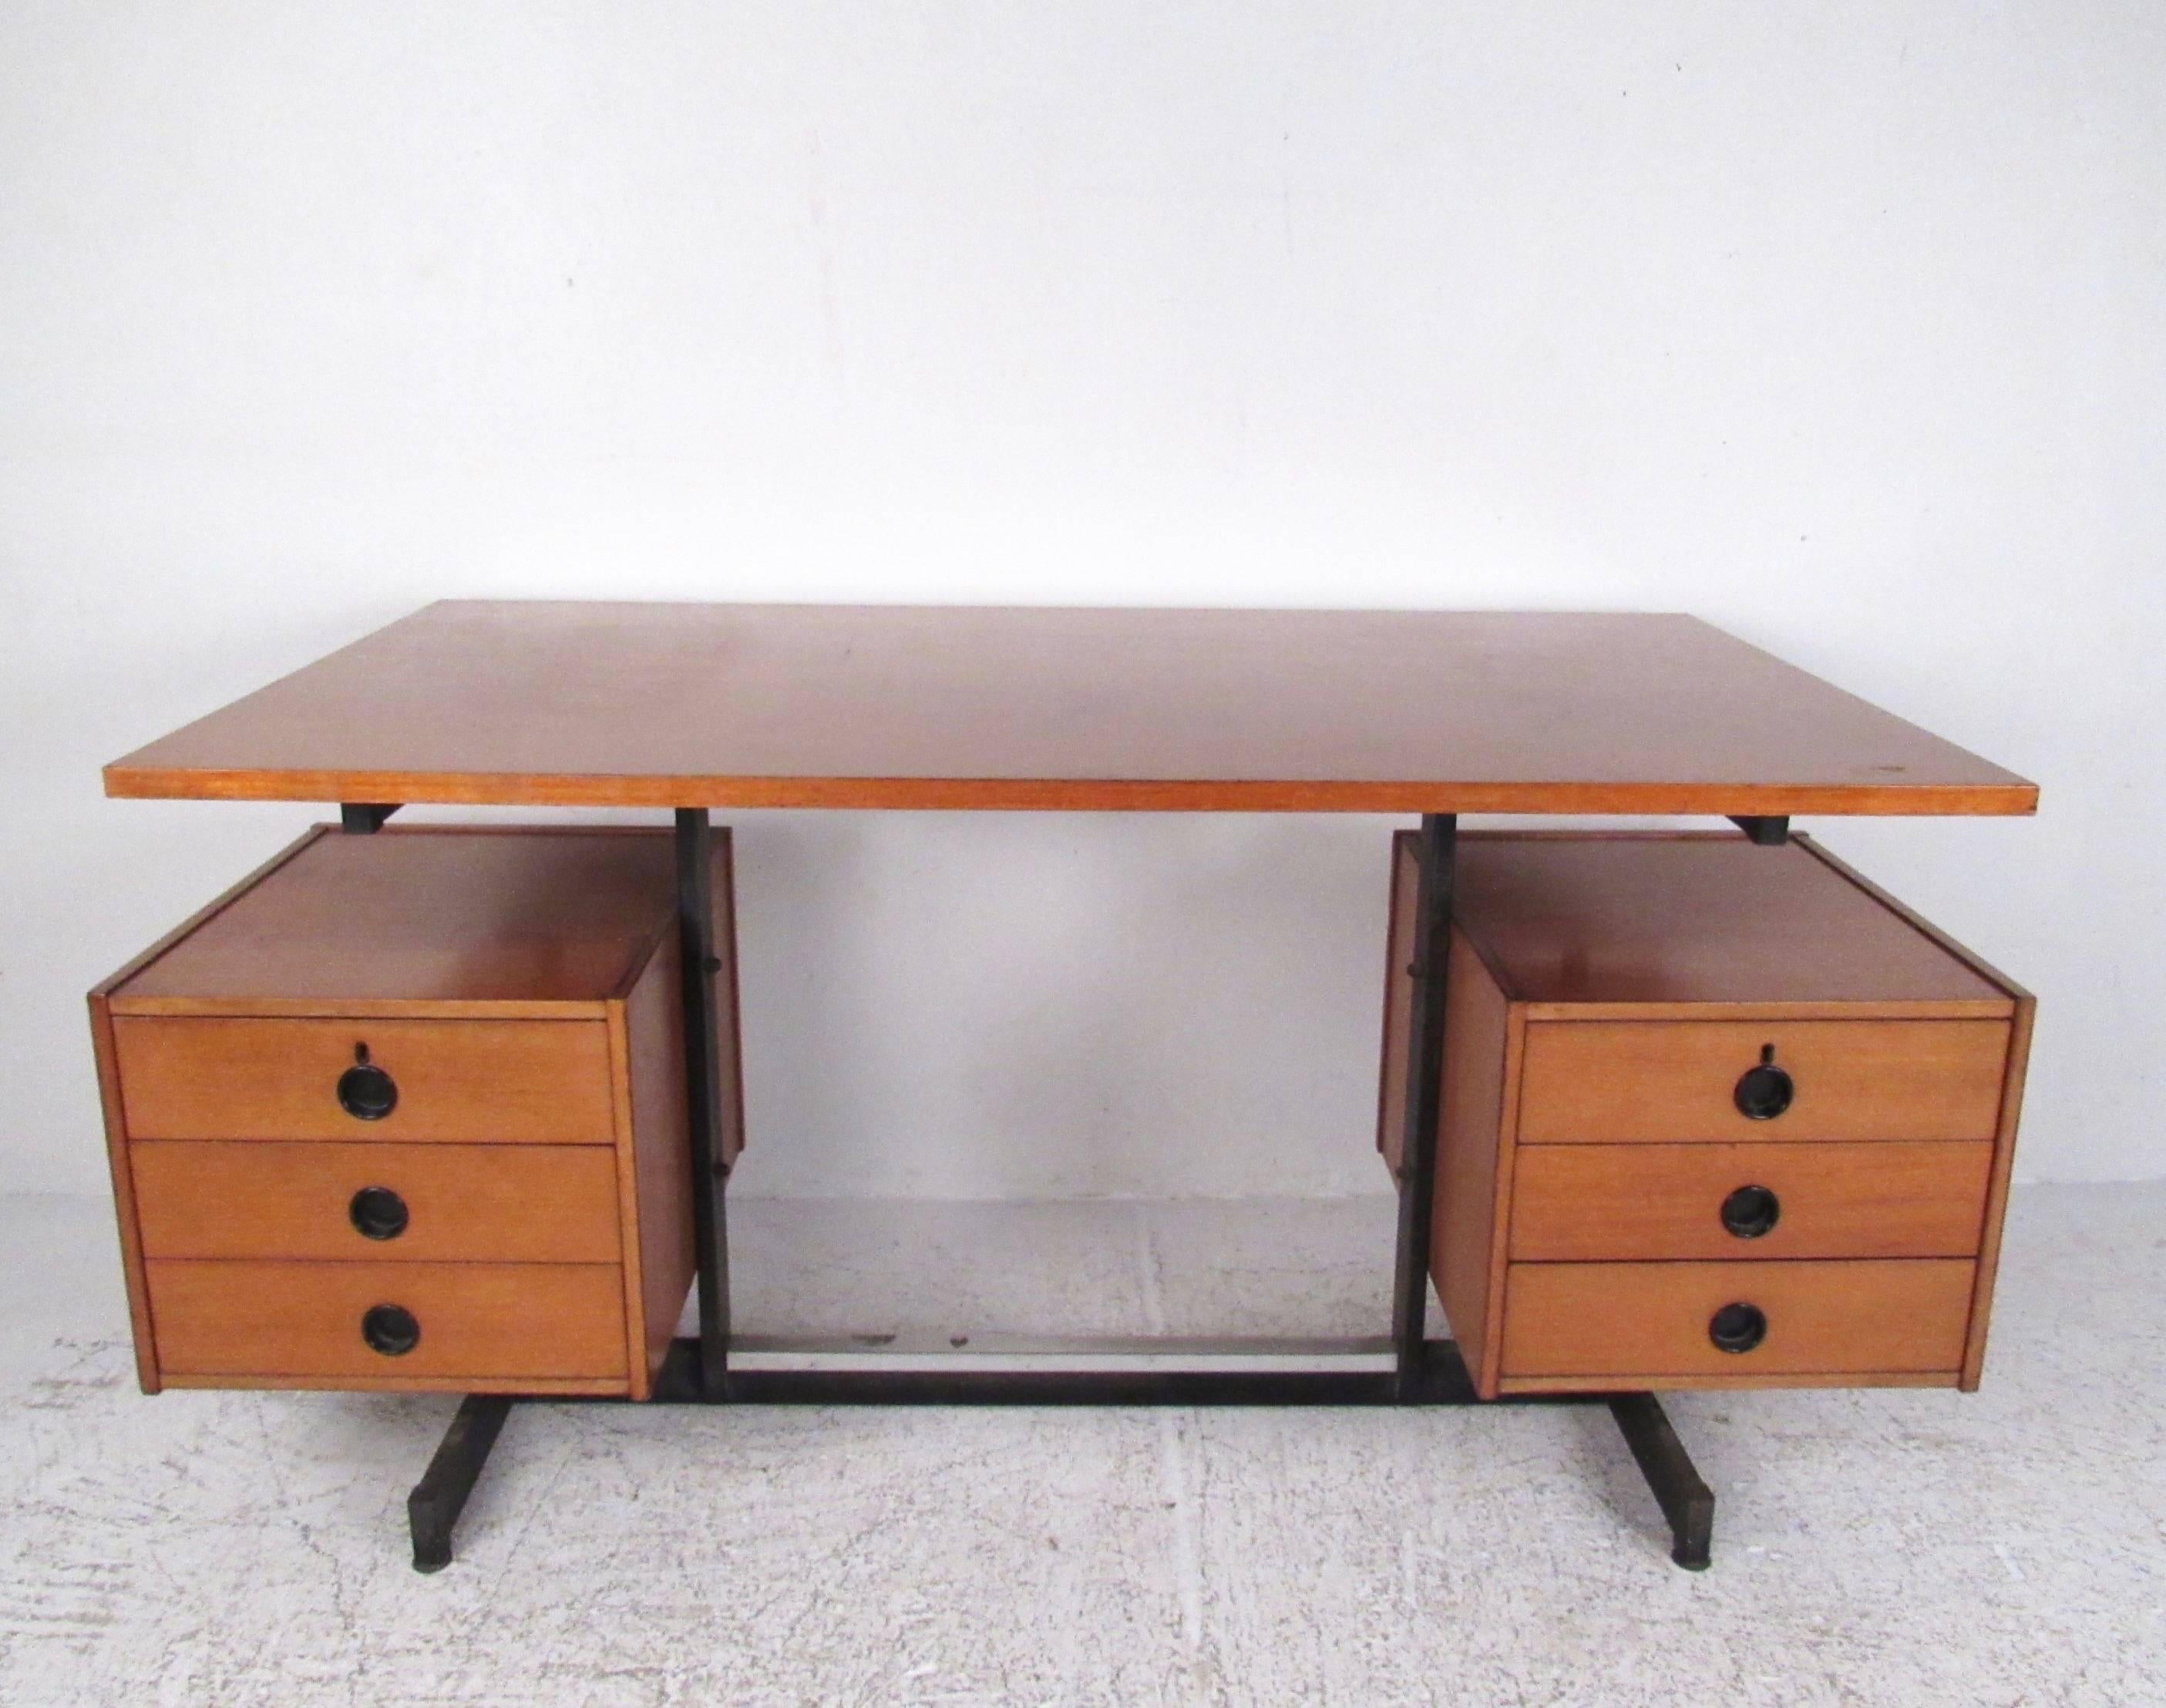 This stylish Italian modern desk features quality teak construction, floating top design, and six drawers for plenty of storage. Unique drawer pulls and midcentury design add to the vintage charm of this impressive writing desk, perfect for home or